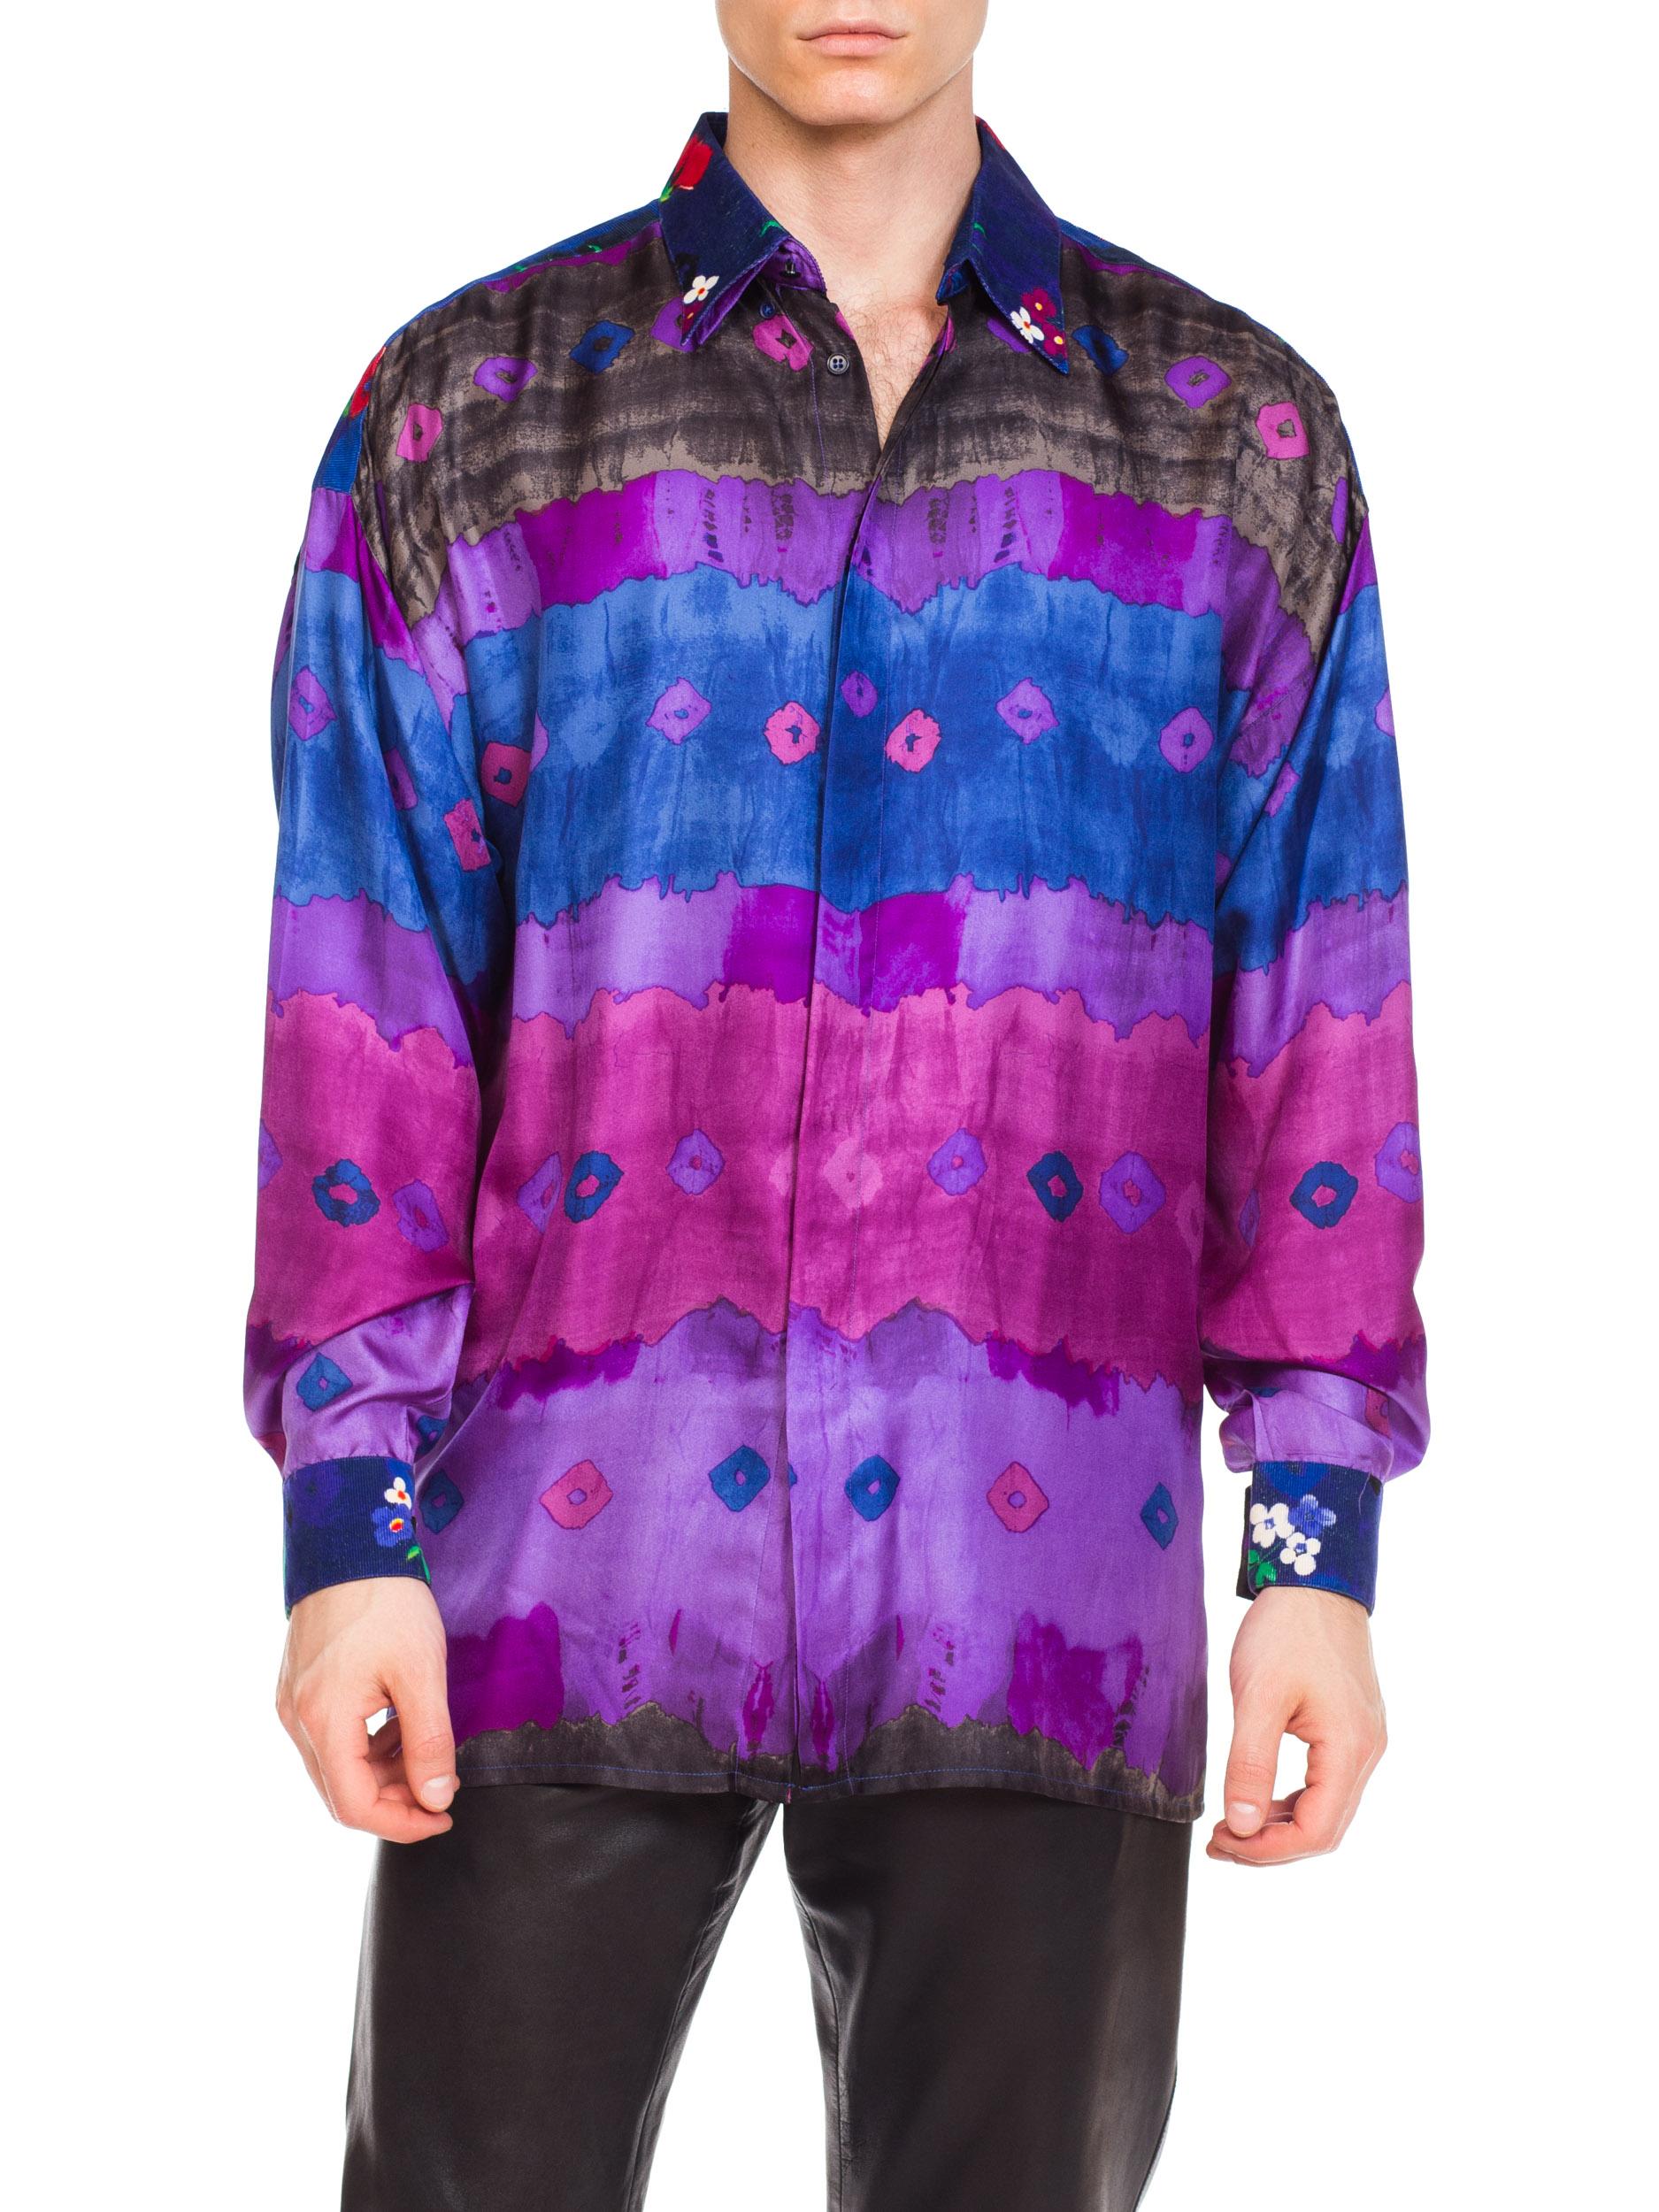 1990S GIANNI VERSACE Purple Tie Dyed Silk & Floral Printed Corduroy Men's  Shir For Sale 3